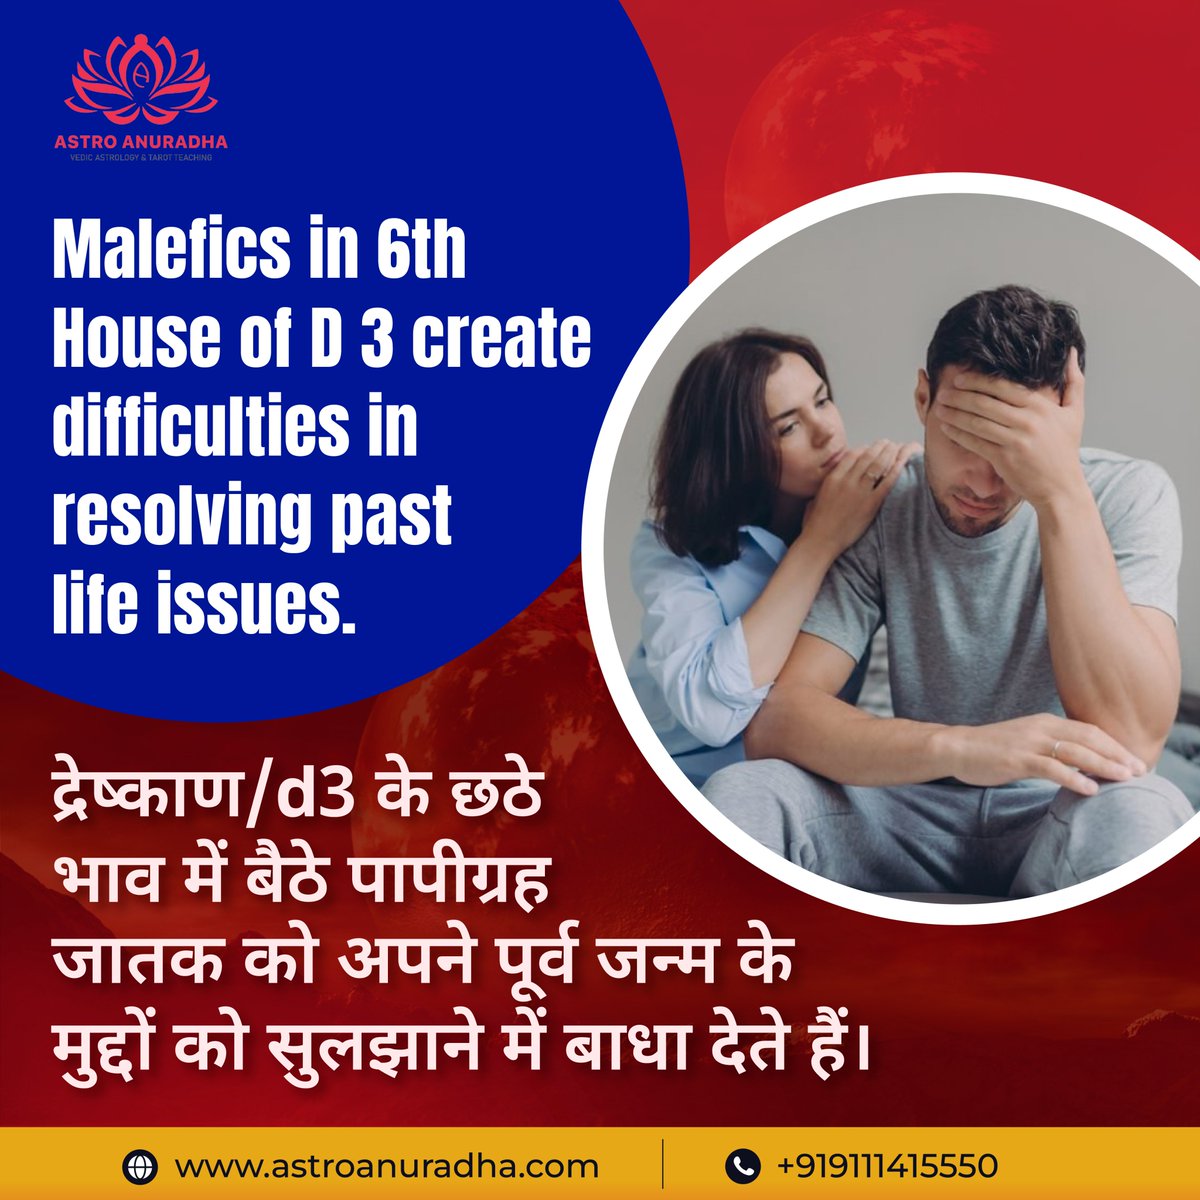 Malefics in 6th House of D 3 create difficulties in resolving past life issues

#astrology #anuradha #vedicastrology #aries #zodiacposts #astrologypost #divisionalcharts #d3 #pastlives #obnstacles #astrologysigns #astrologersofinstagram #spiritual #energy #moon #horoscopes